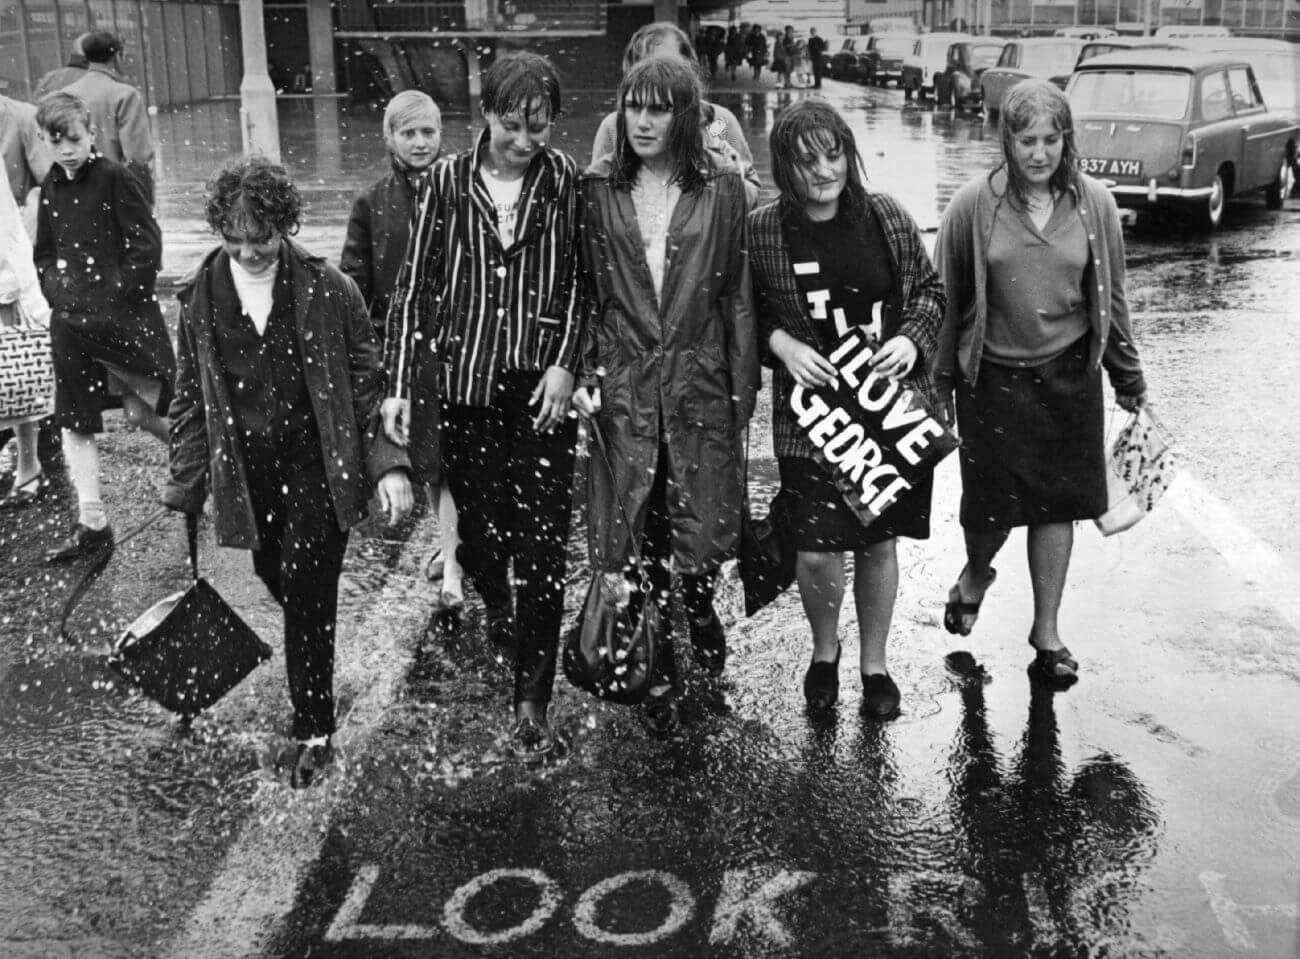 A black and white picture of Beatles fans walking through the rain. One holds a sign that says "I Love George."